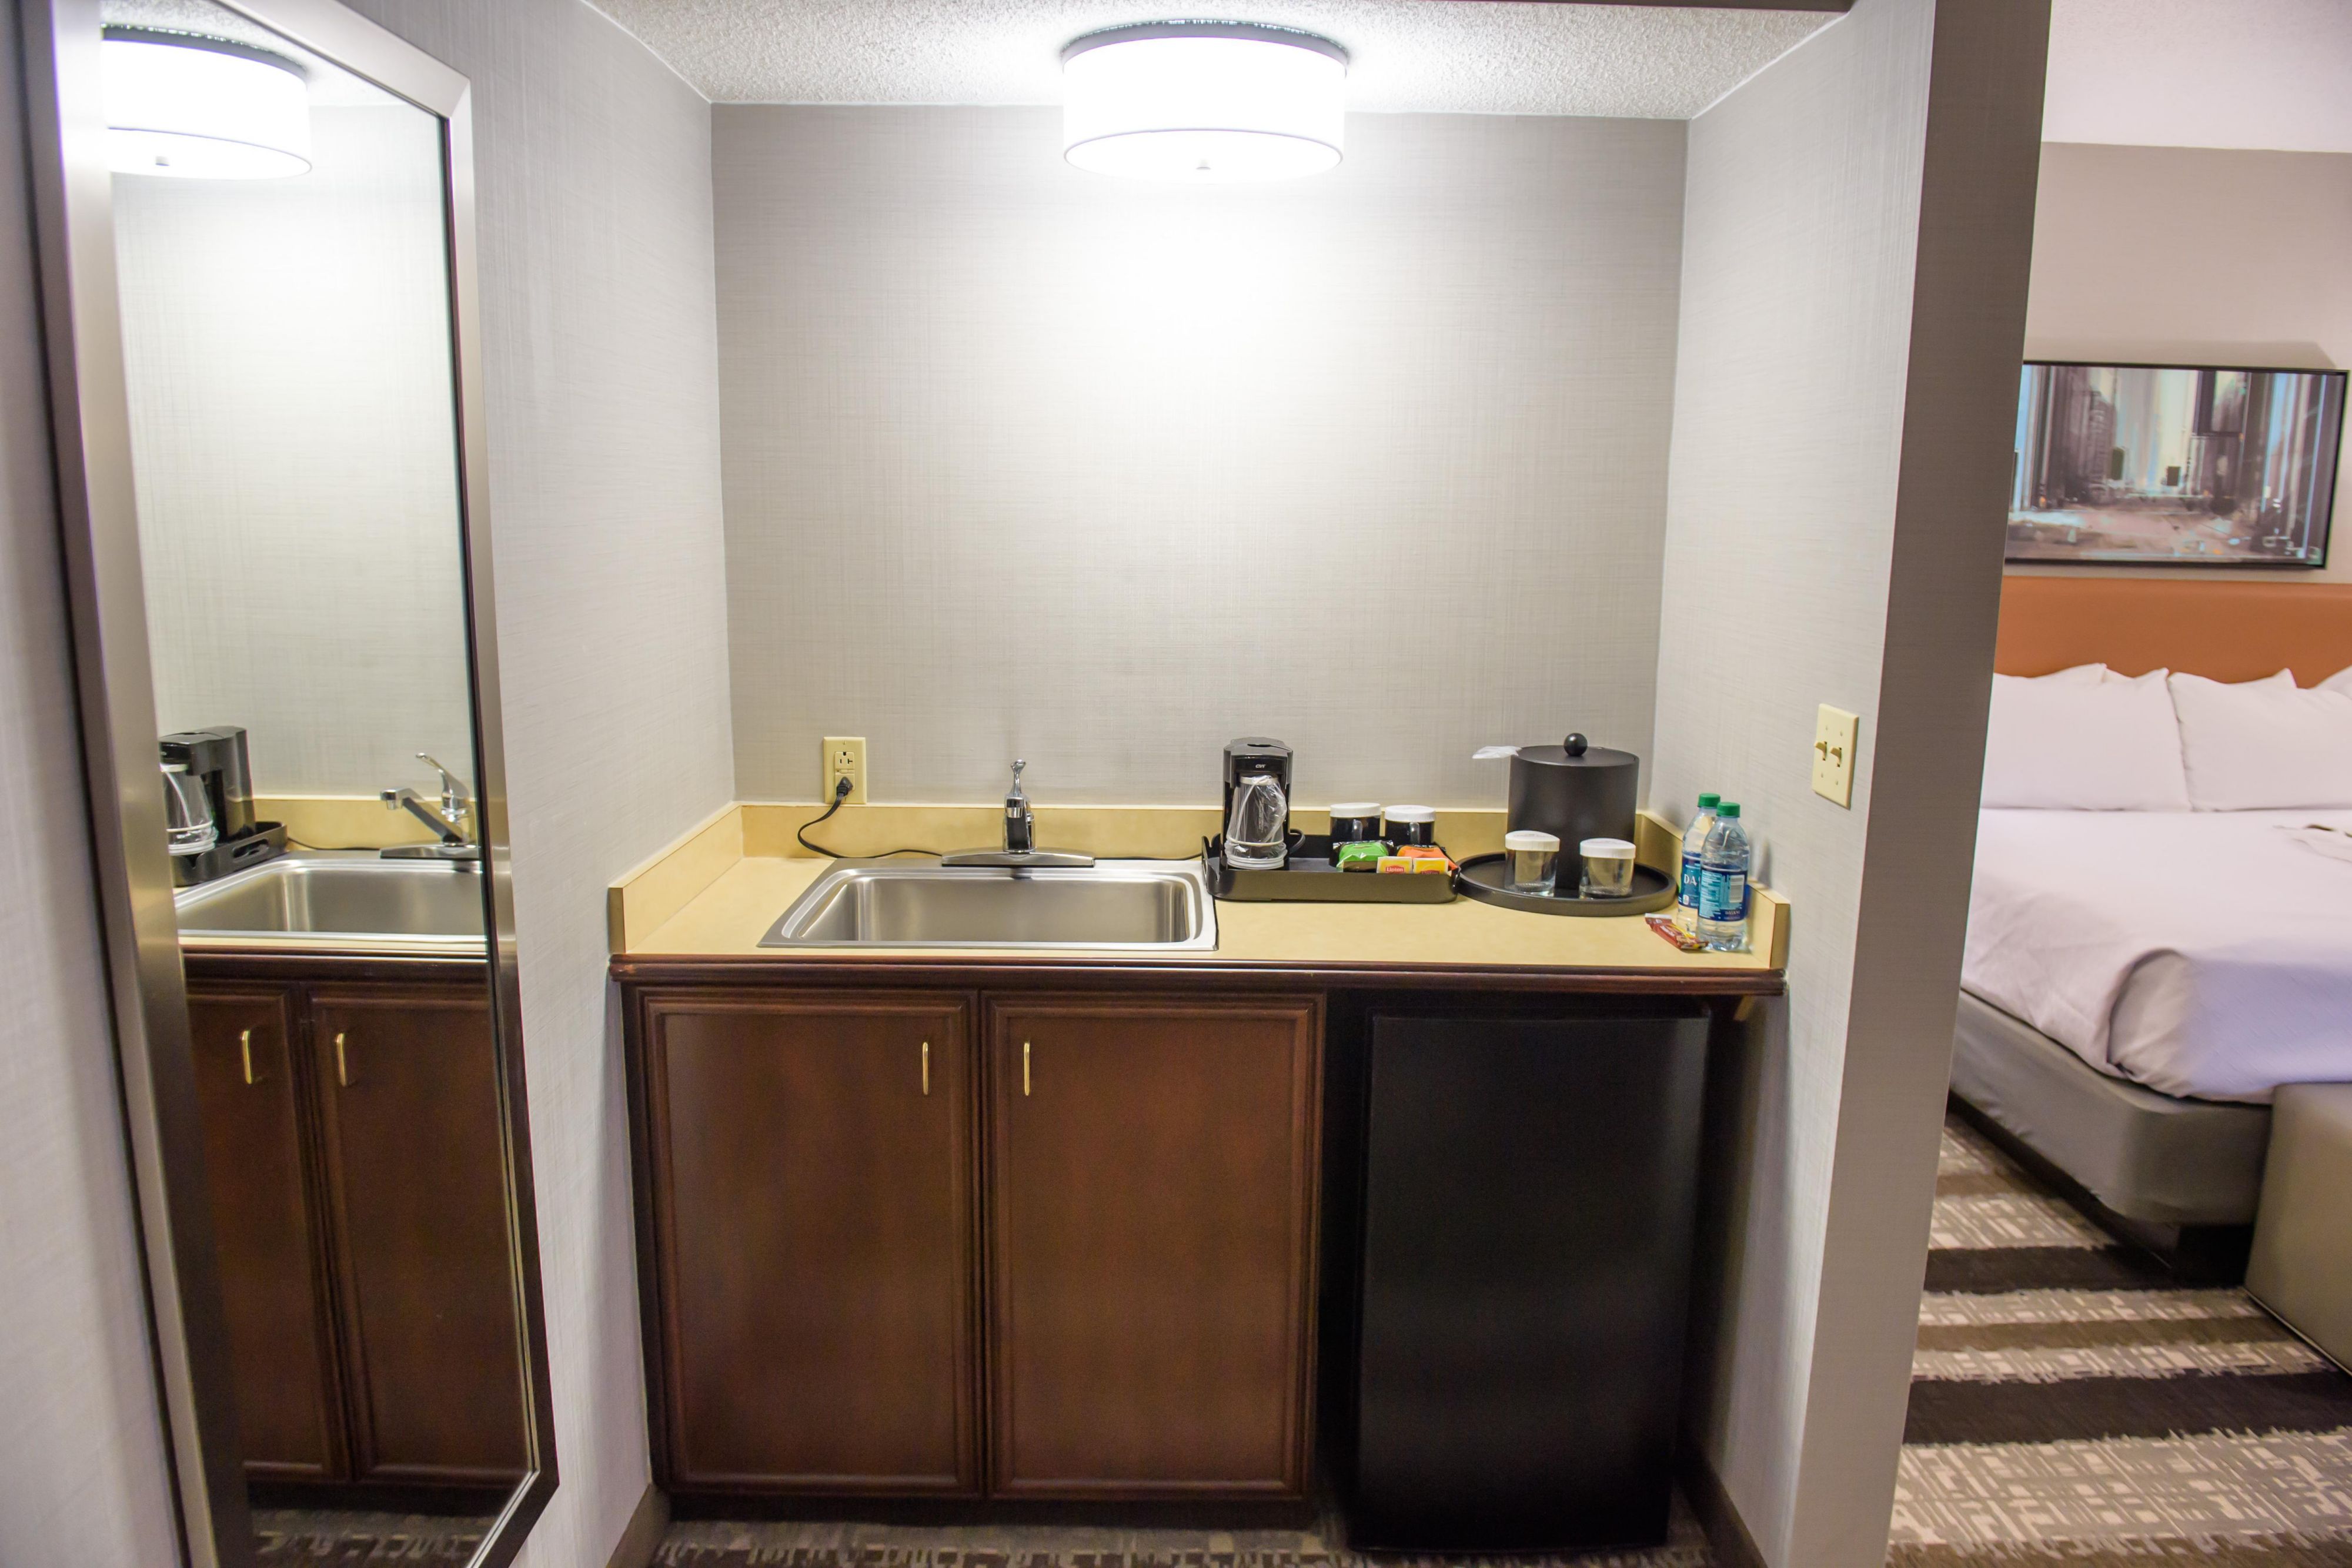 Some Feature Rooms come with a kitchen counter and sink